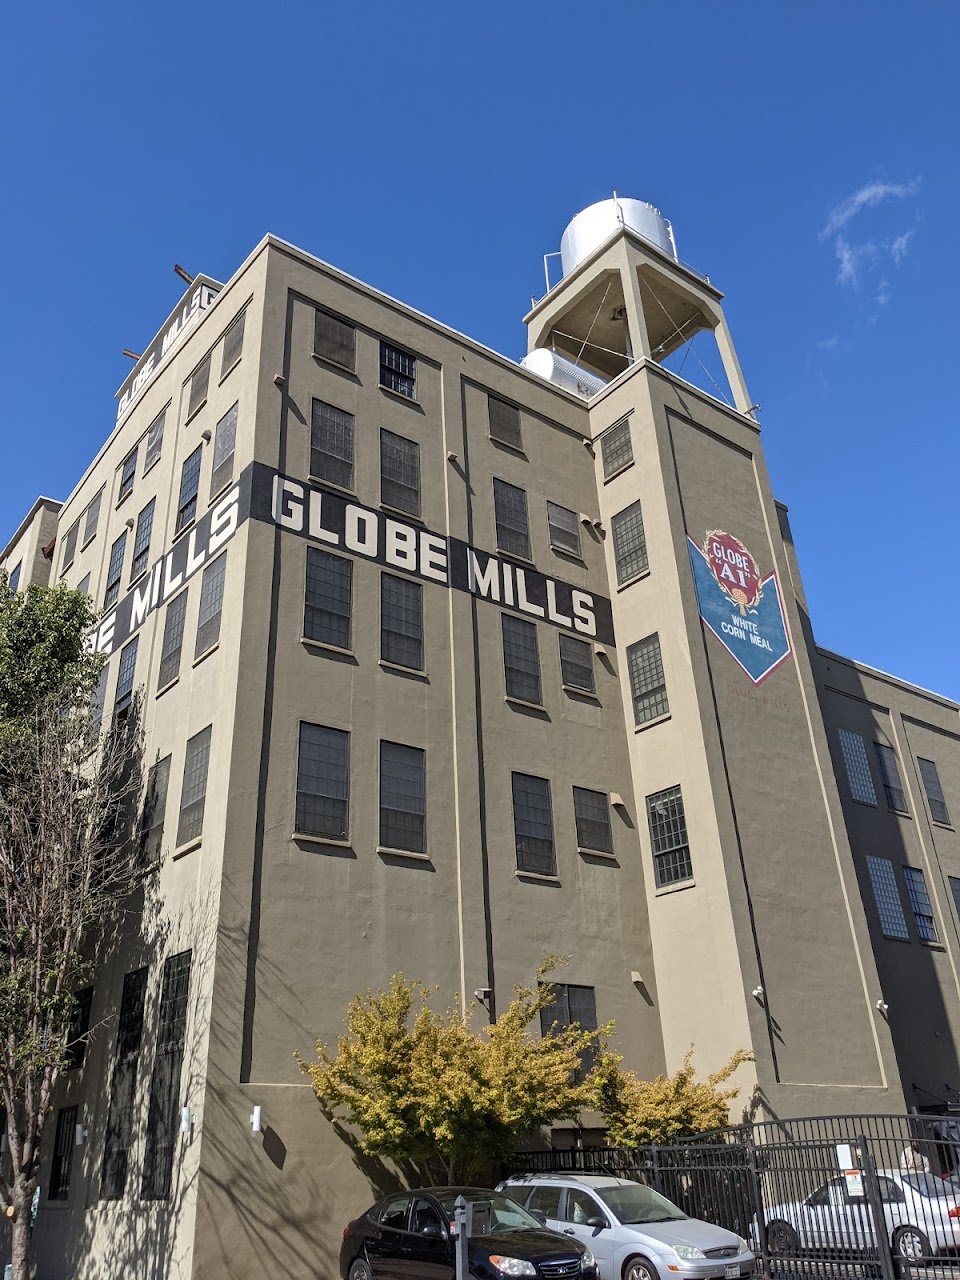 Photo of GLOBE MILLS. Affordable housing located at 1131 C ST SACRAMENTO, CA 95814